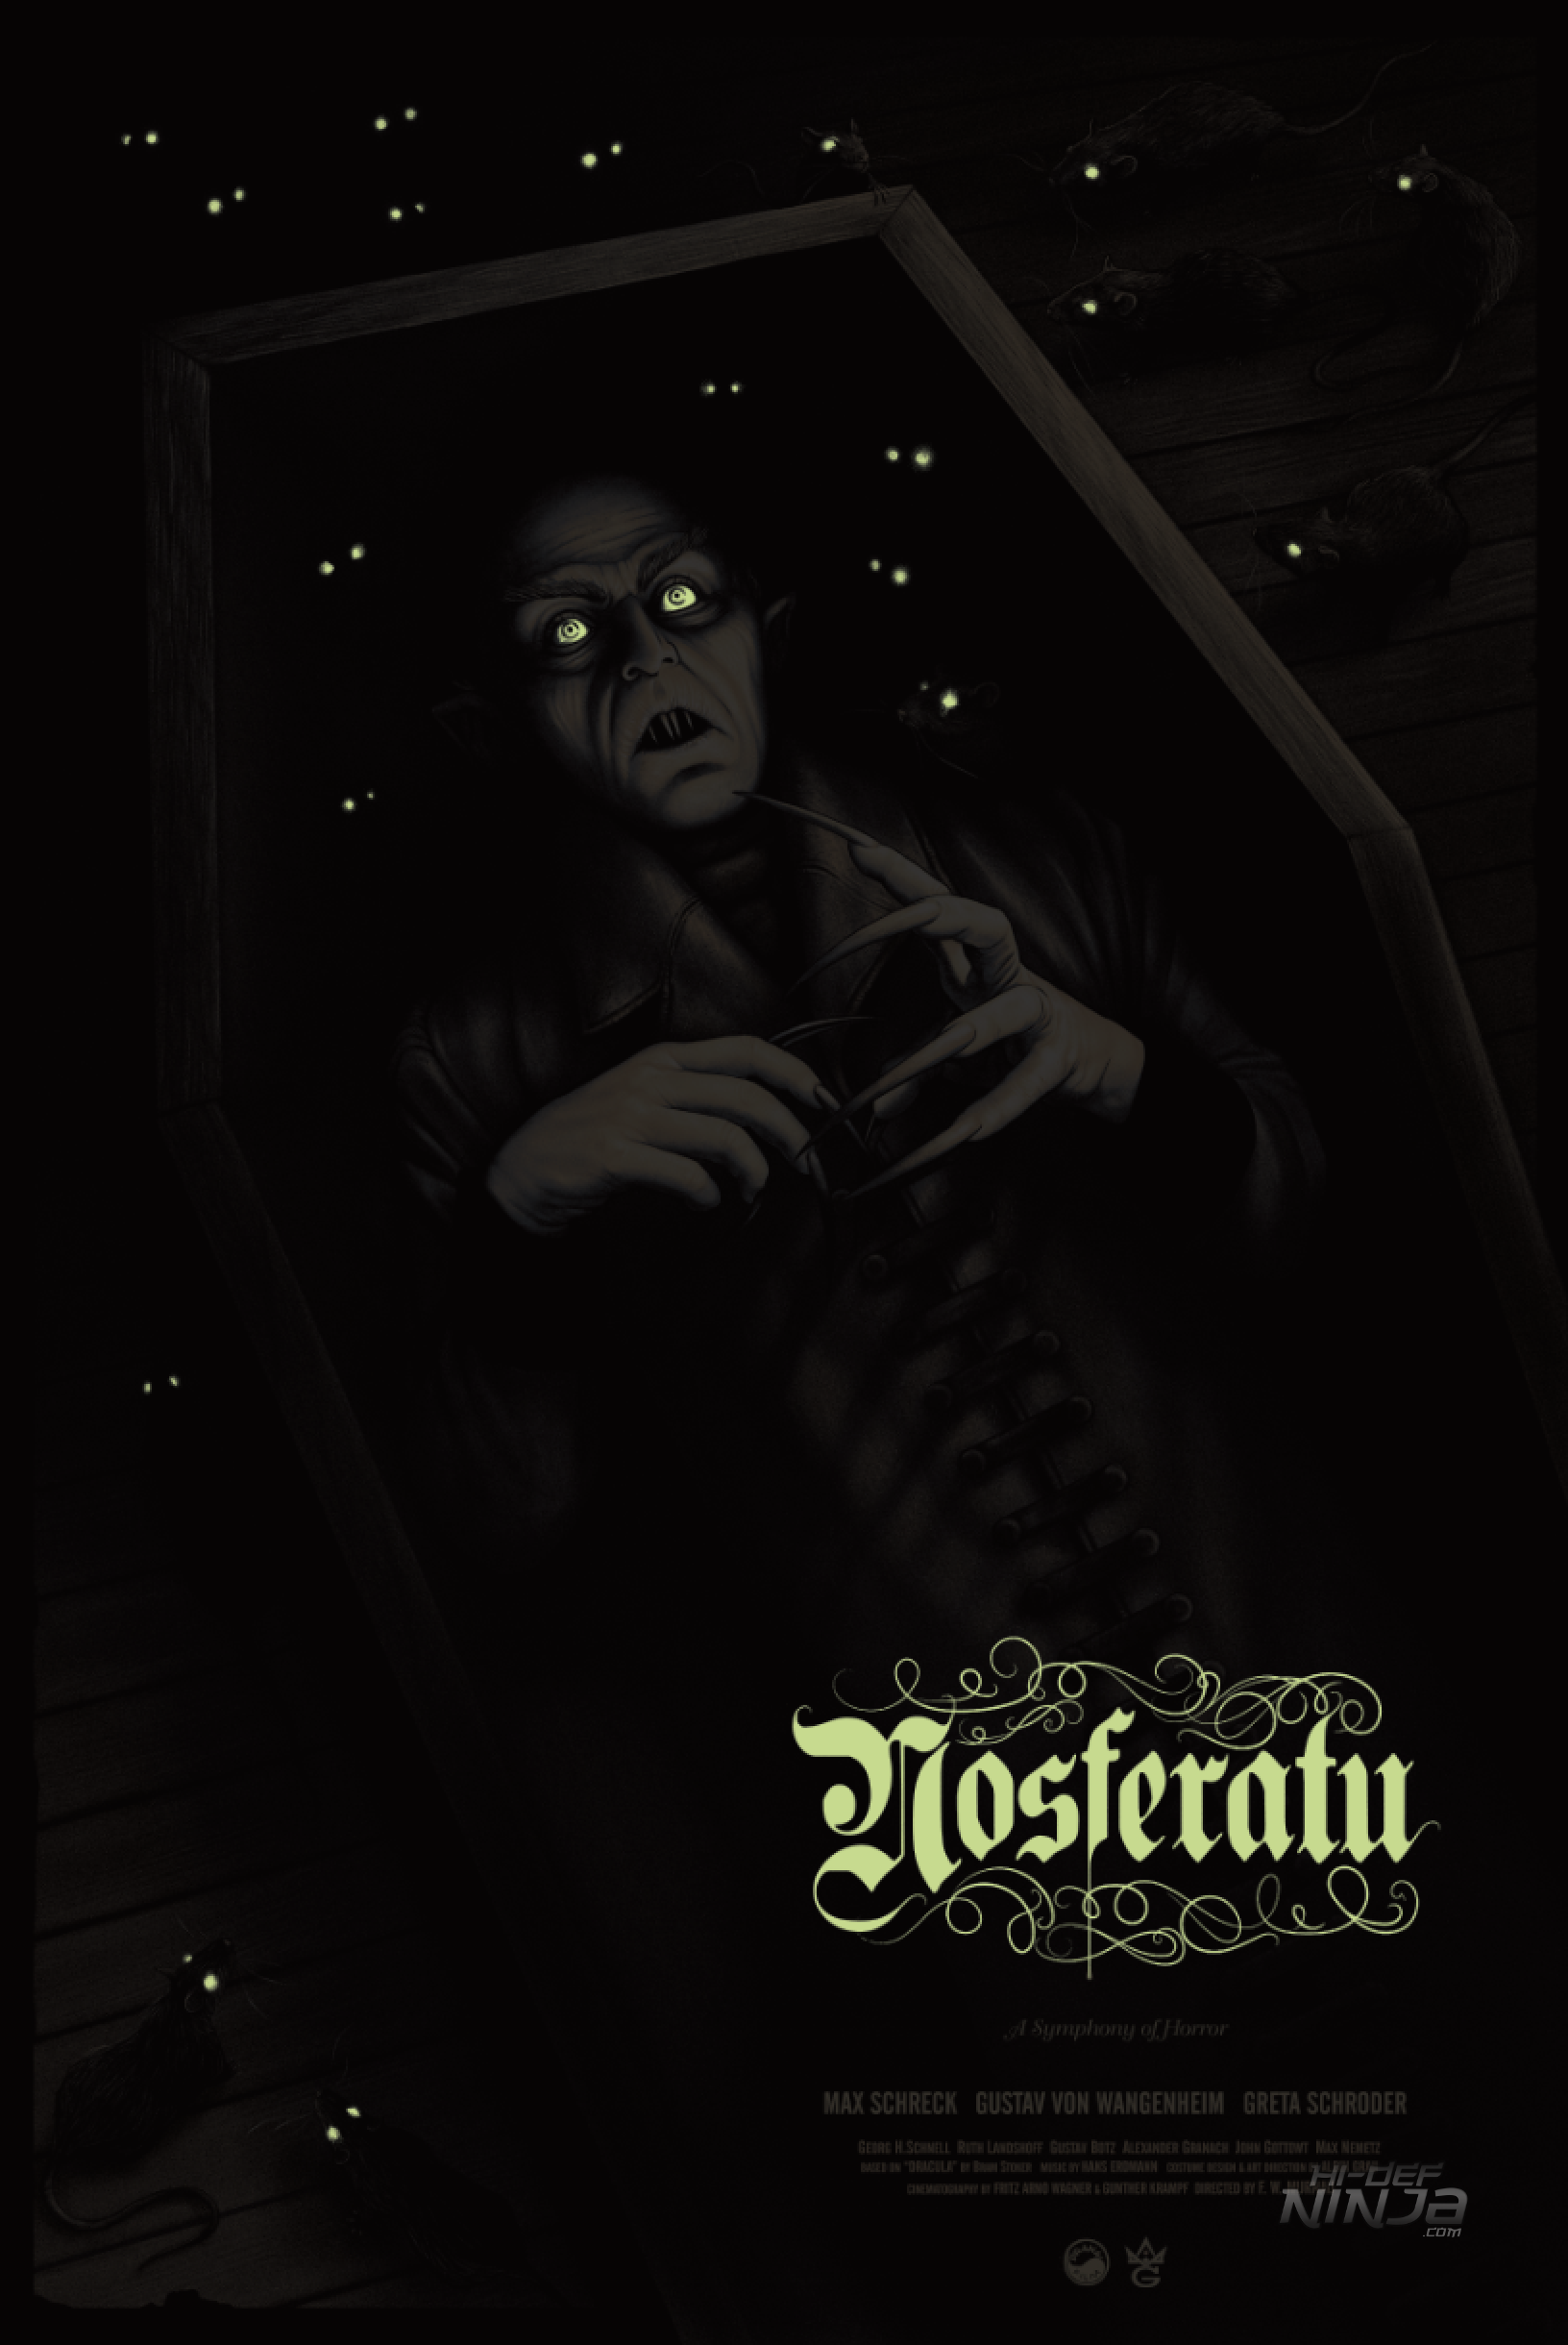 NOSFERATU by Sara Deck is Grey Matter Art's latest poster goes on sale